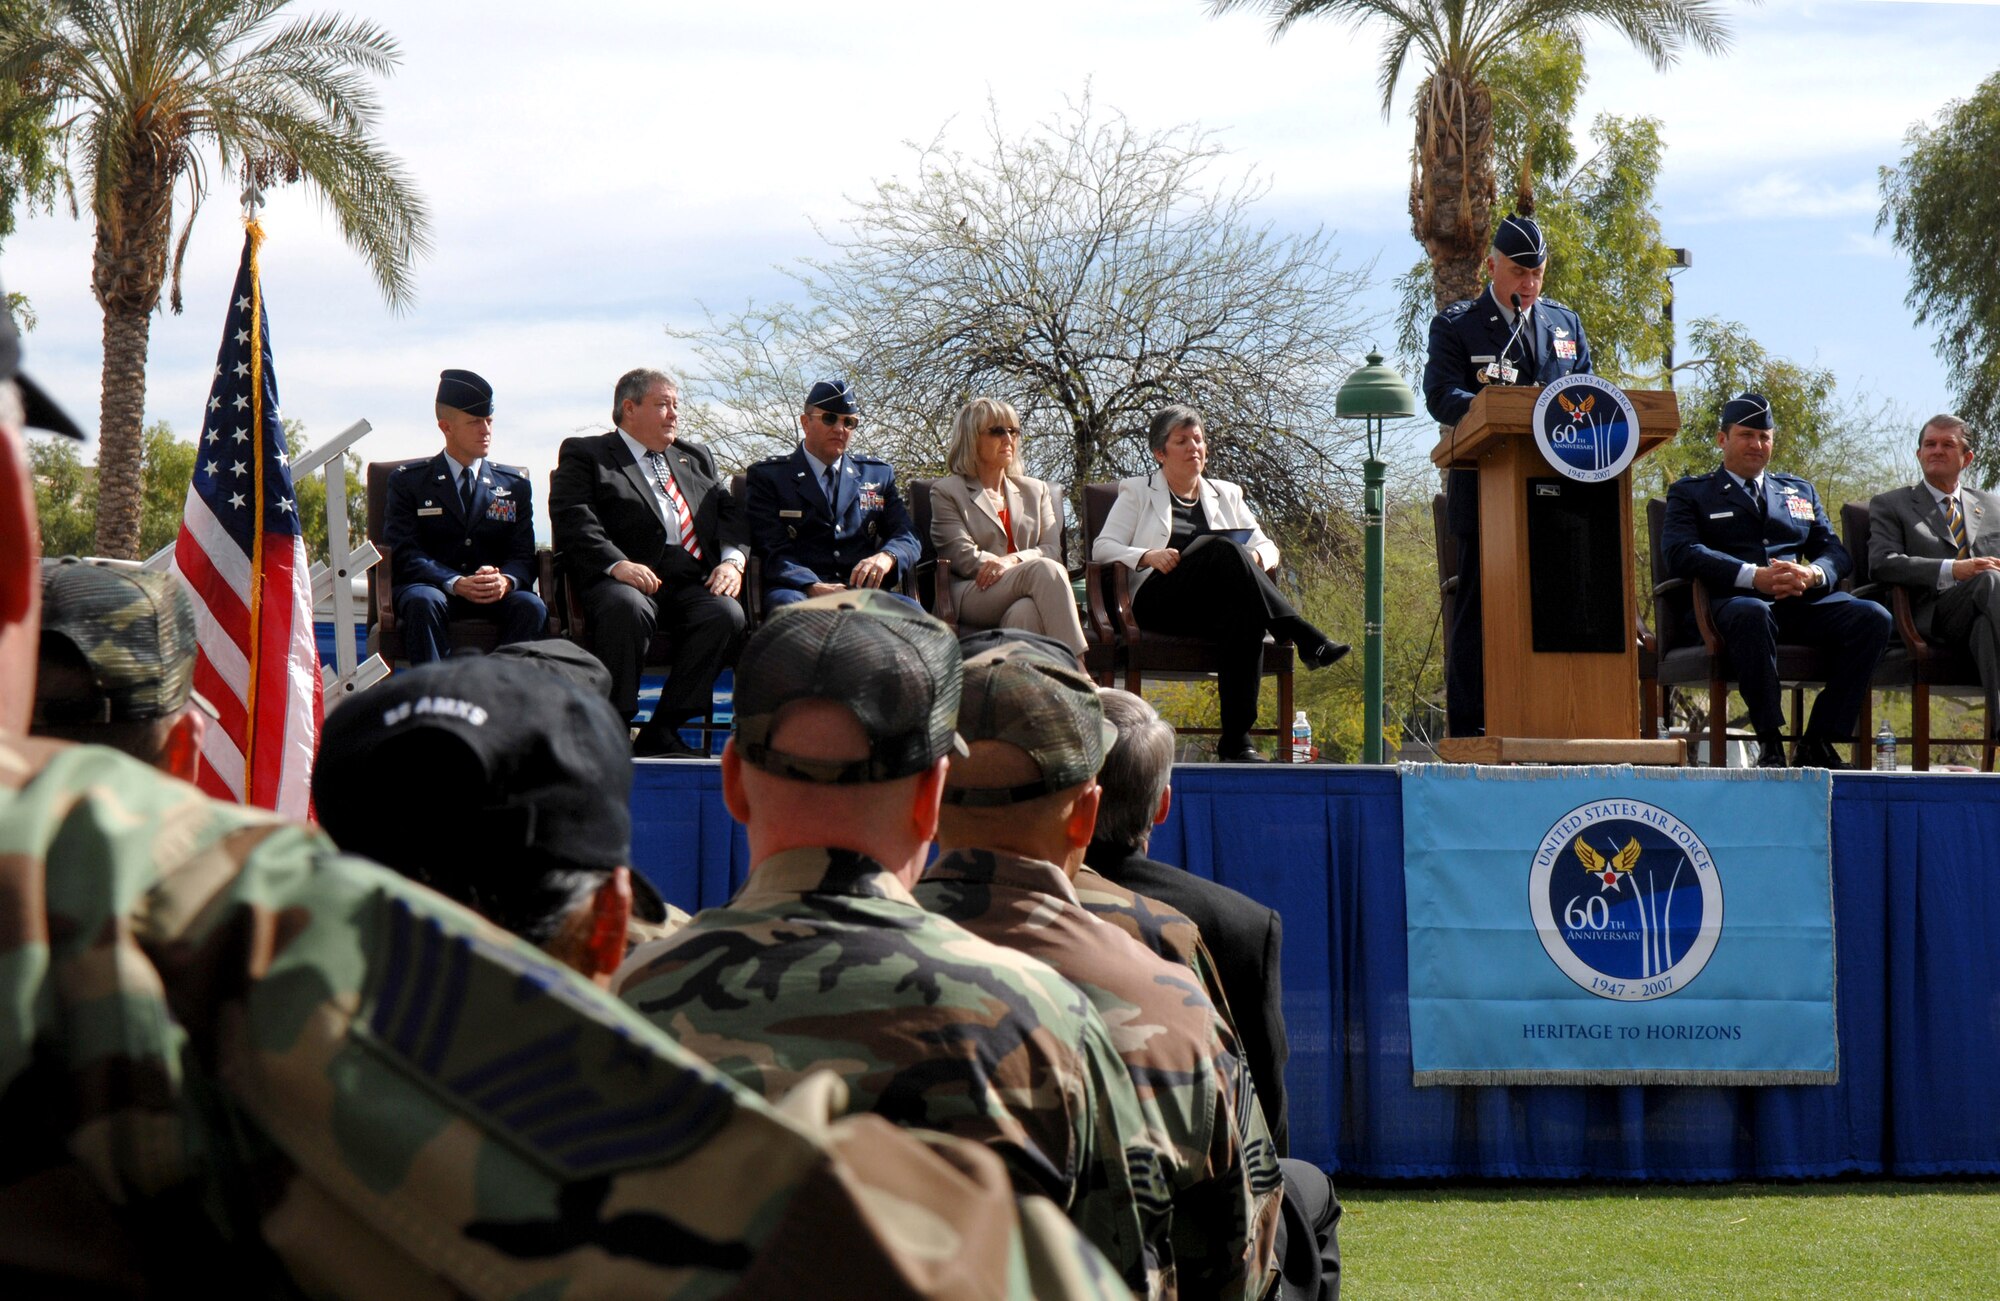 Lt. Gen. Carrol H. Chandler gives a speech on the lawn of the state capital in Phoenix after Arizona Governor Janet Napolitano declared the week of March 19-25 Air Force Week during a proclamation ceremony. Several bus loads of Airmen from nearby Luke Air Force Base joined Arizona state officials and Air Force senior leaders at the state's capital to kick off this year's first Air Force Week event. (U.S. Air Force photo/Staff Sgt. Brian Ferguson) 
